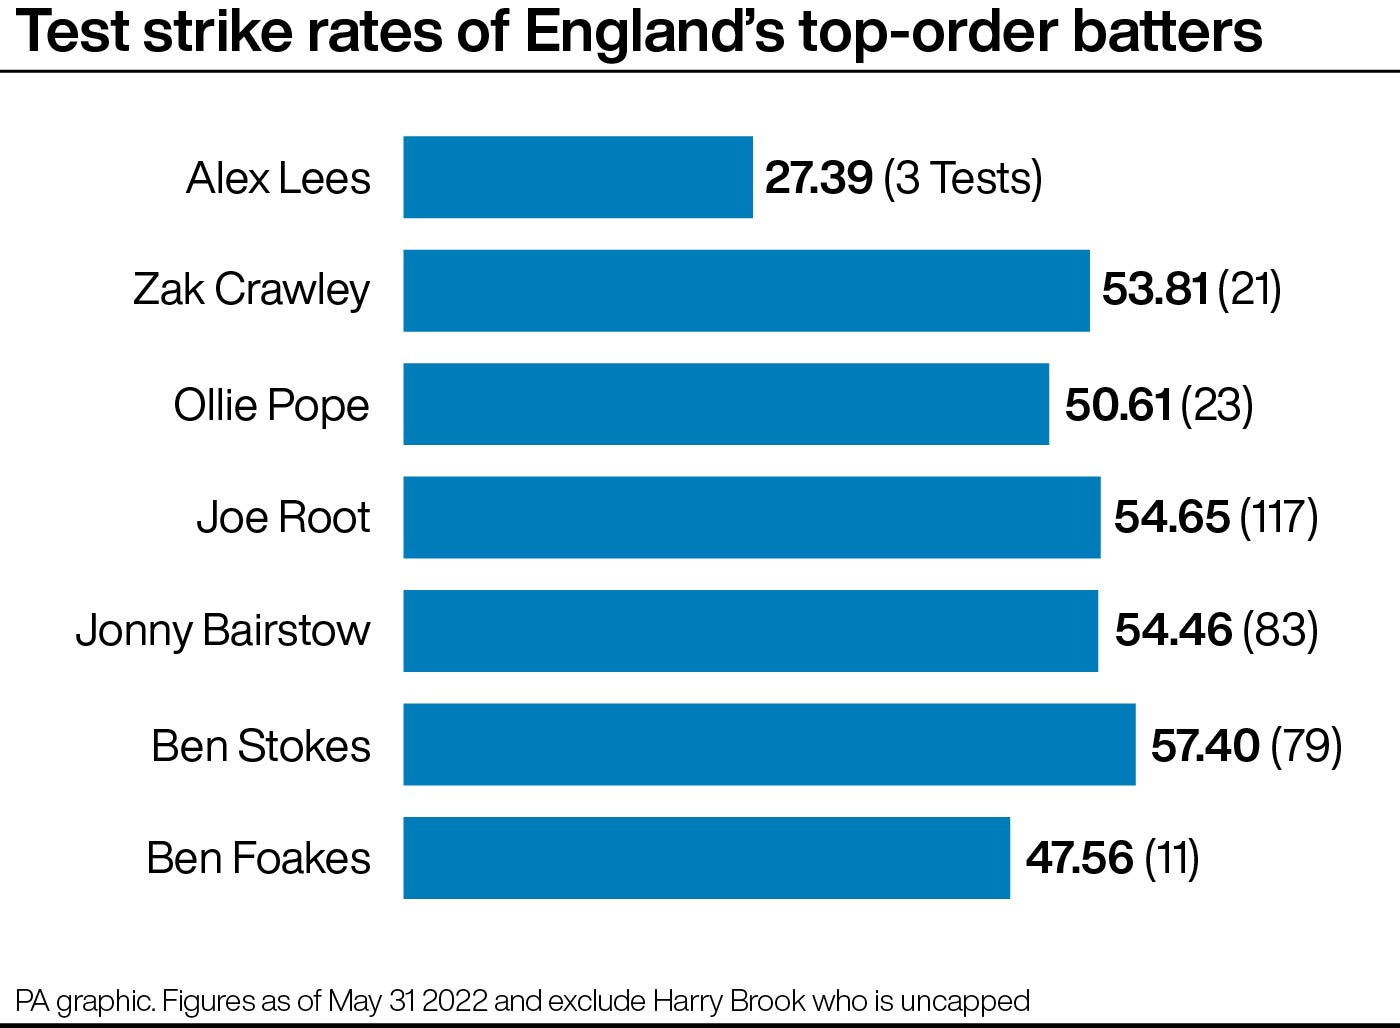 Test strike rates of England's top-order batters